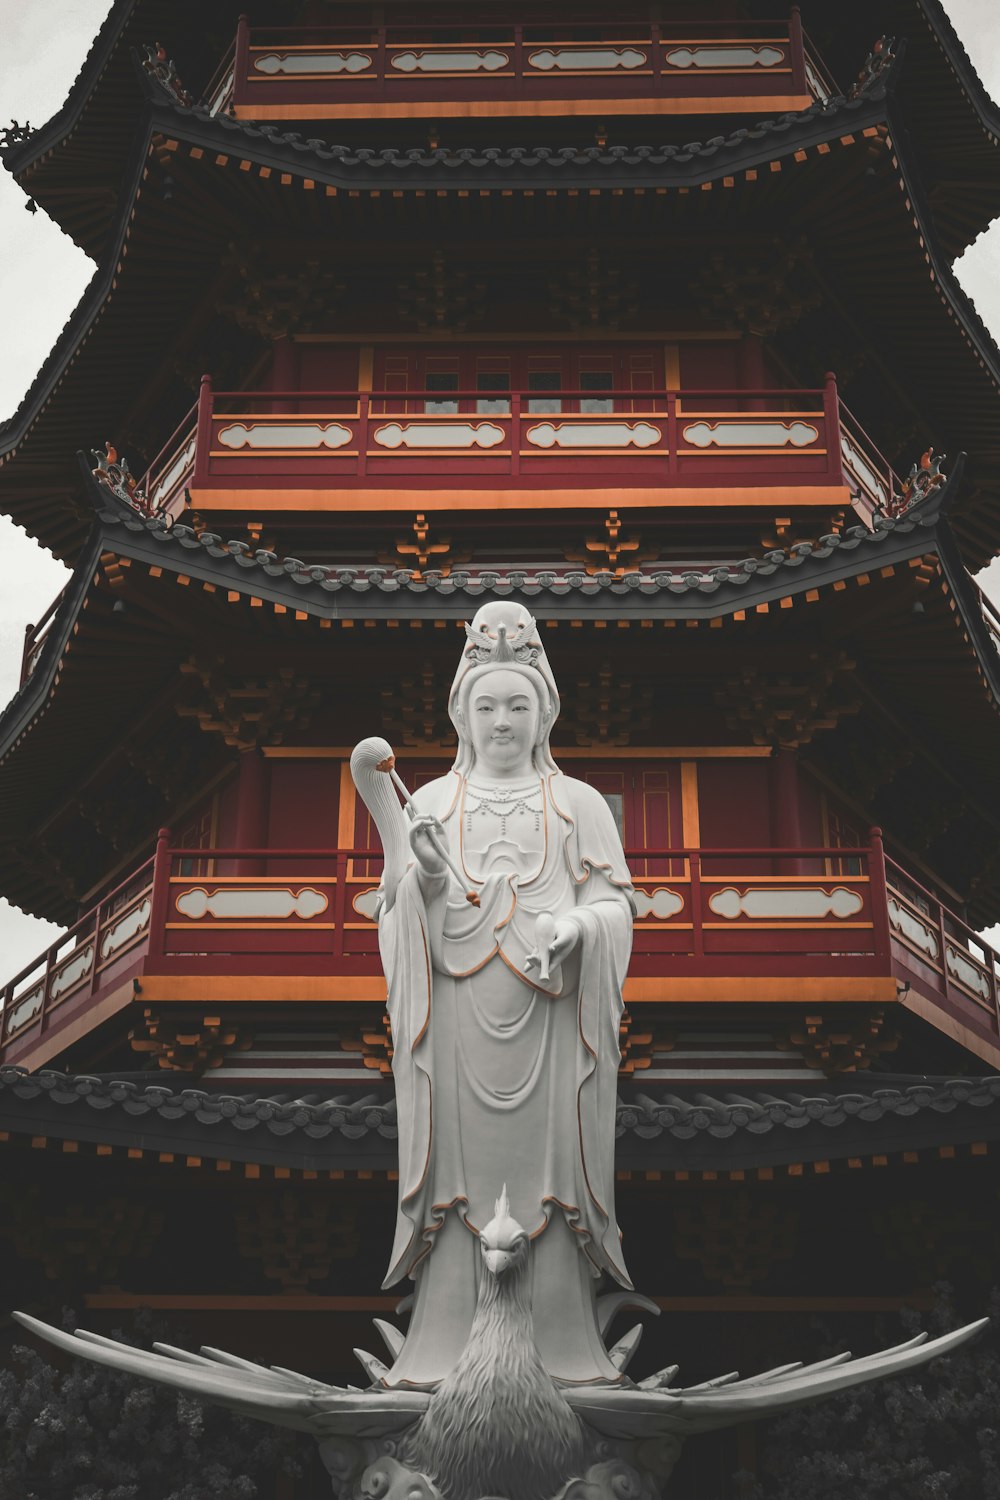 a statue of a woman in front of a pagoda